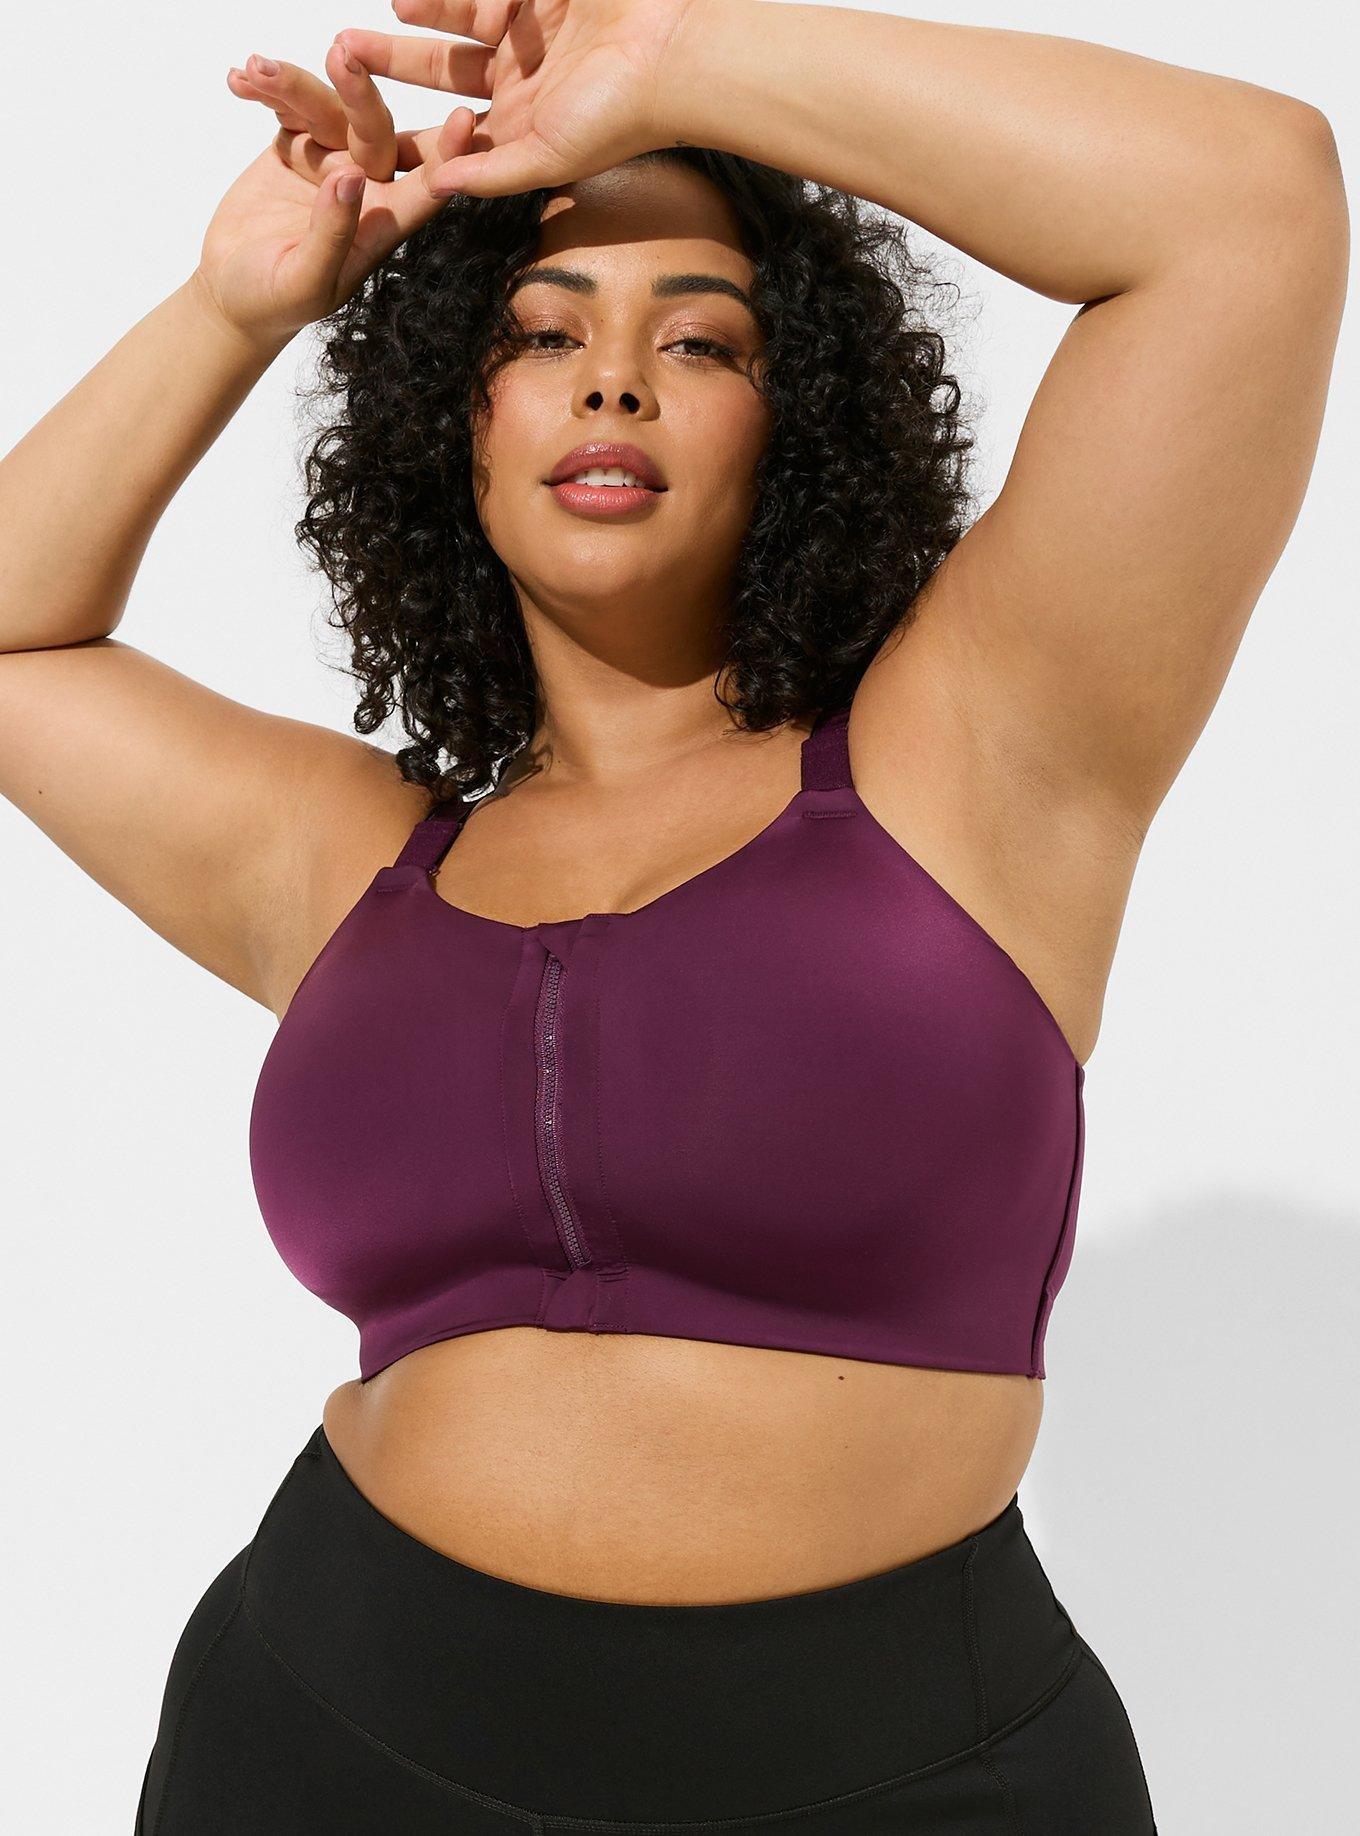 Torrid - A good bra is hard to find. (Unless you shop at Torrid!) Take care  of them!  40% off when you buy 3 or more!